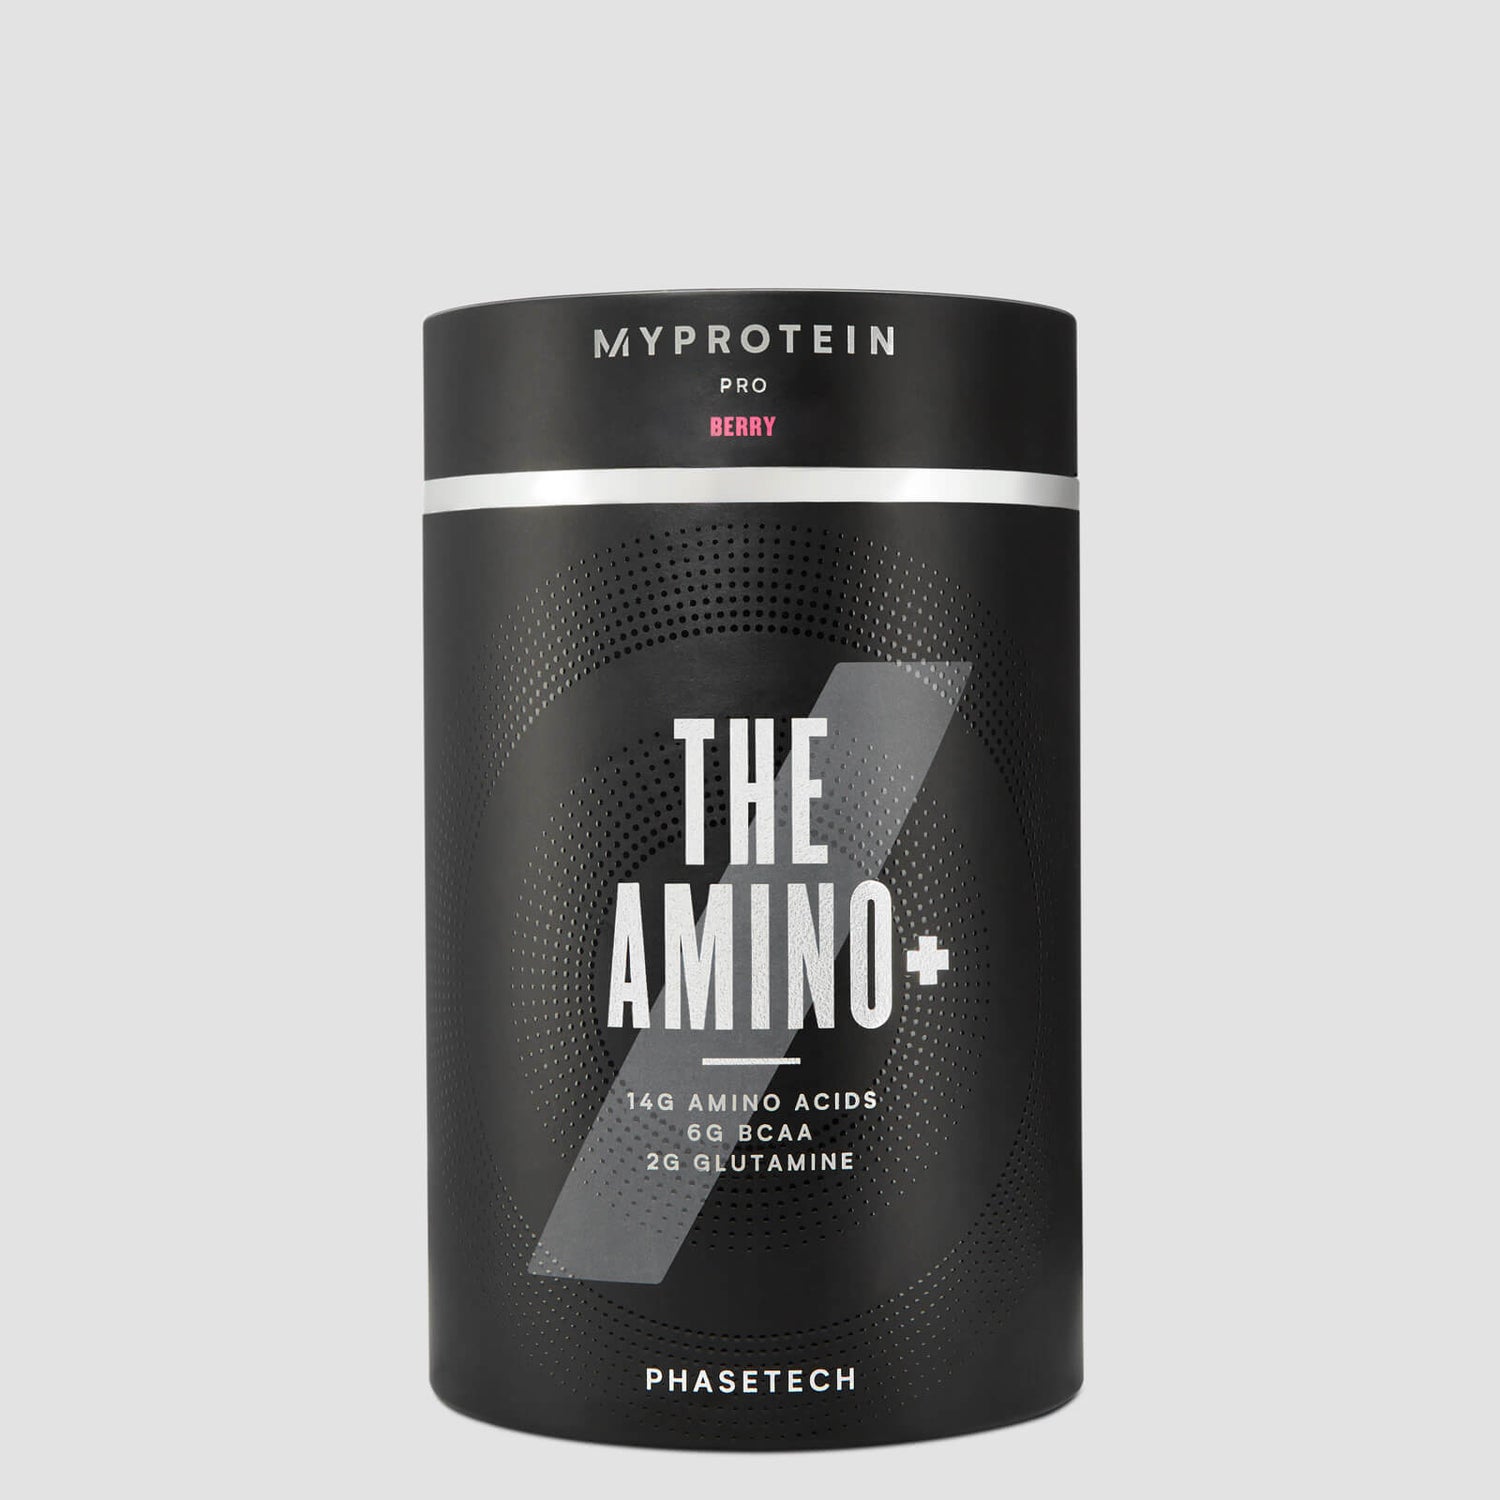 THE Amino+ - 20servings - Ogas